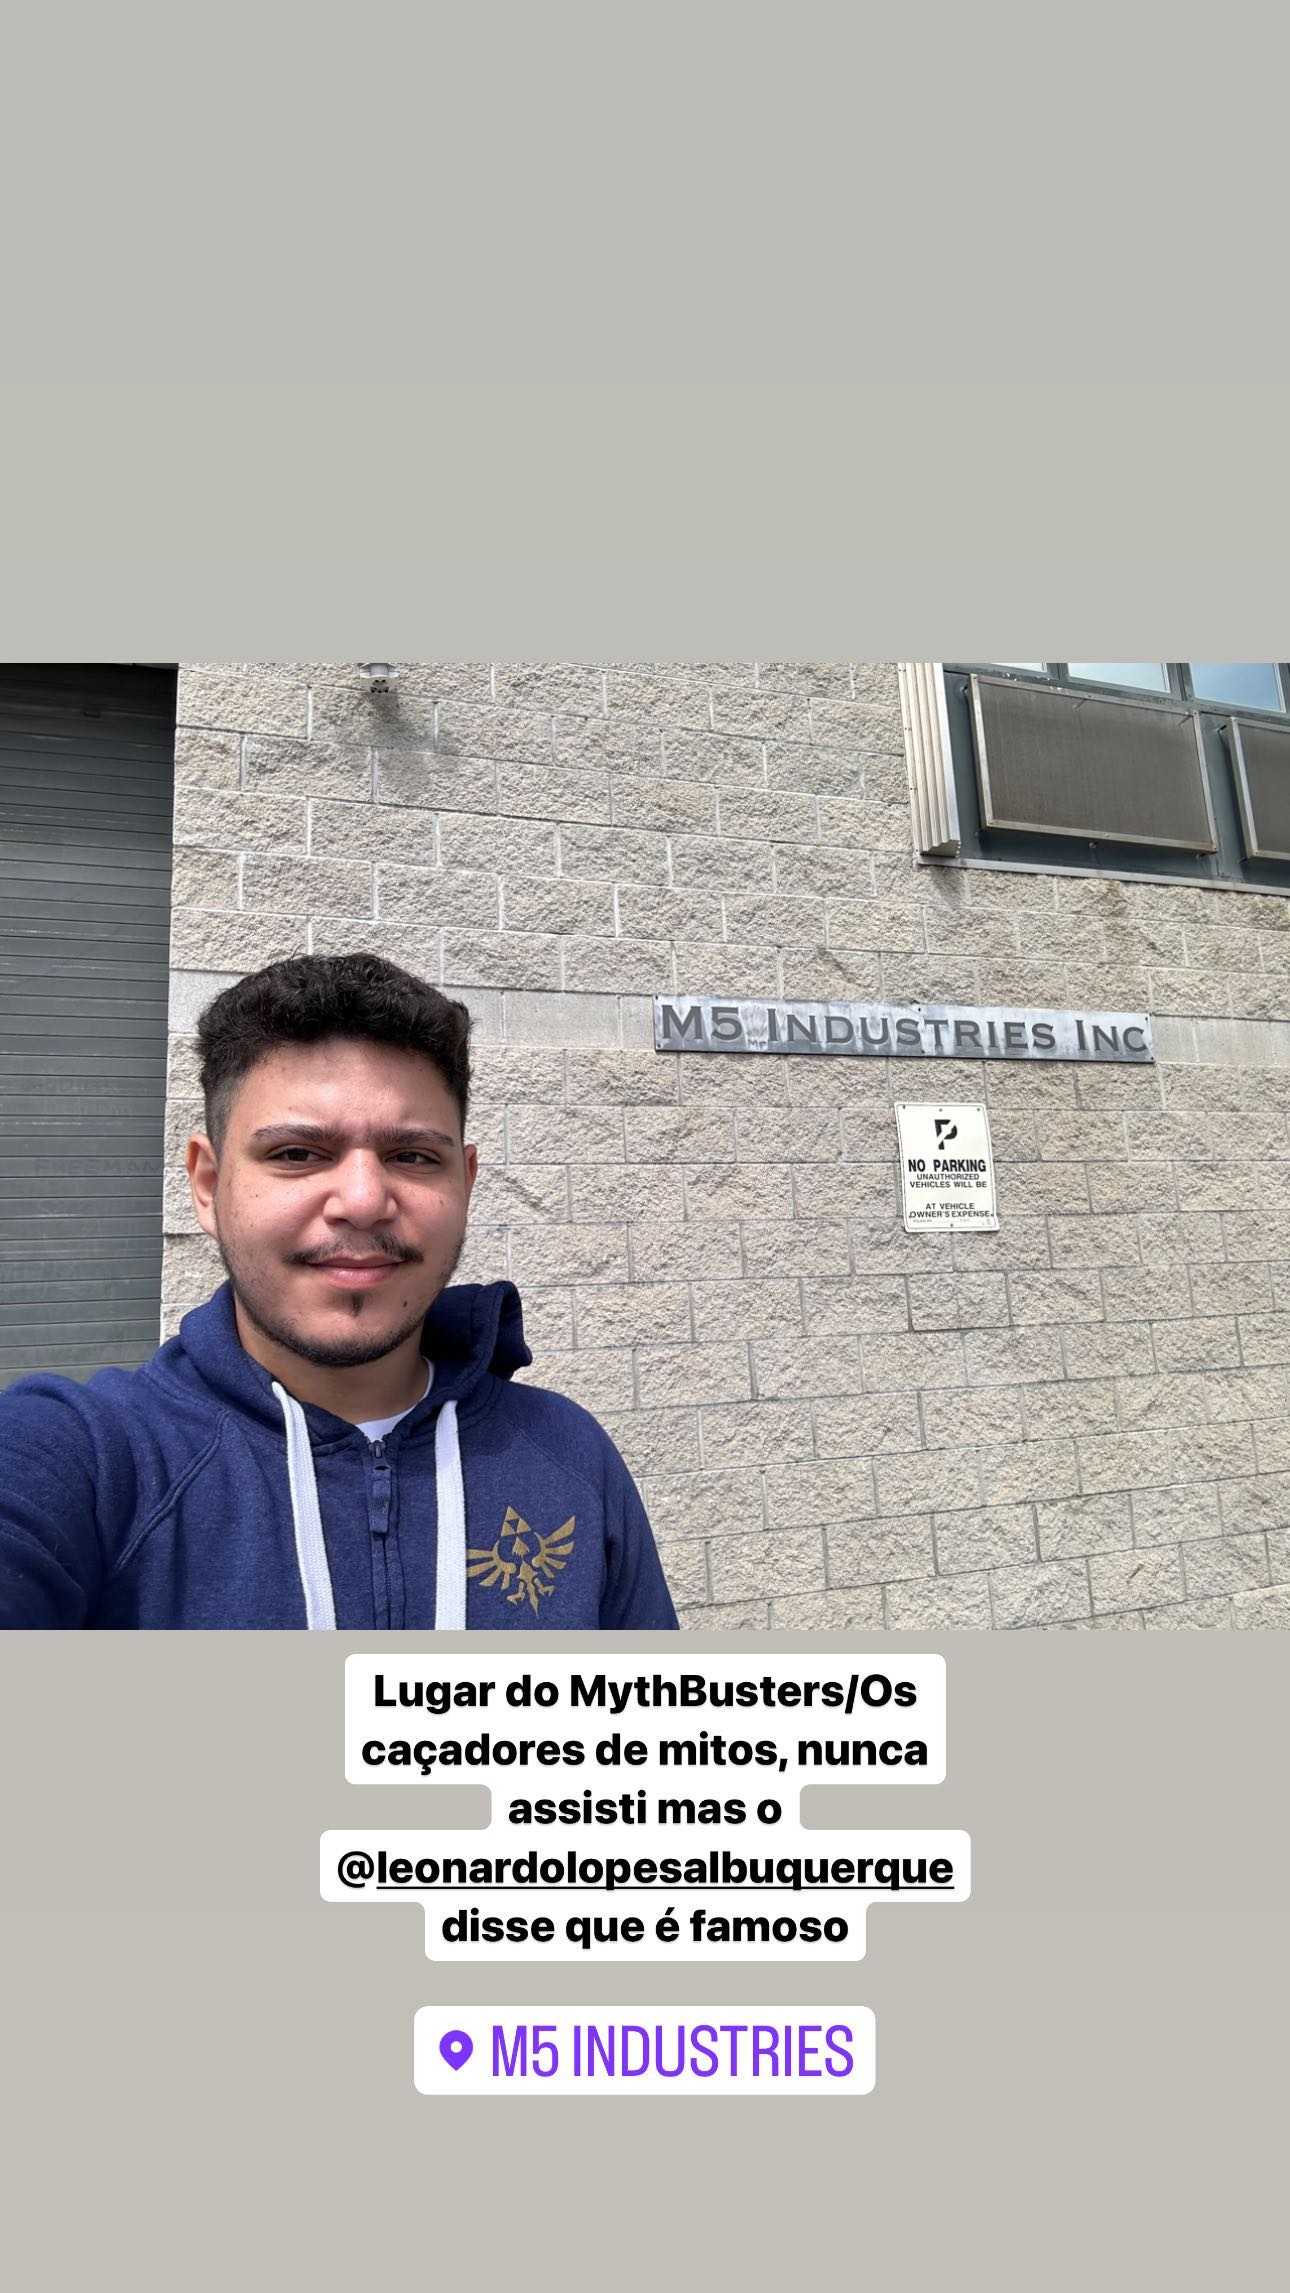 MythBusters place, I've never watched it but @leonardolopesalbuquerque said it's famous